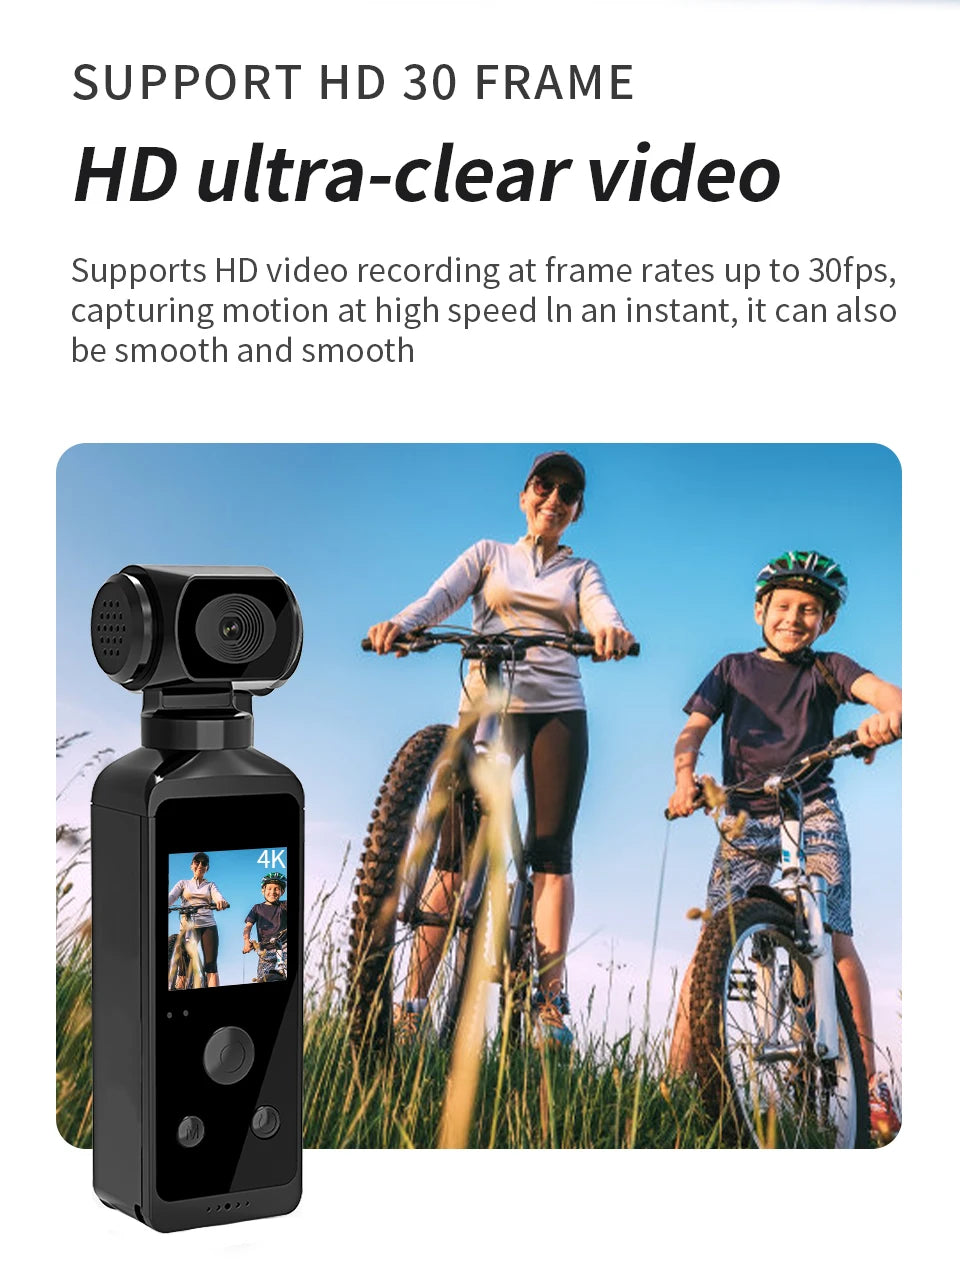 4K Ultra HD Pocket Action Camera, SUPPORT HD 30 FRAME HD ultra-clear video captures motion at high speed